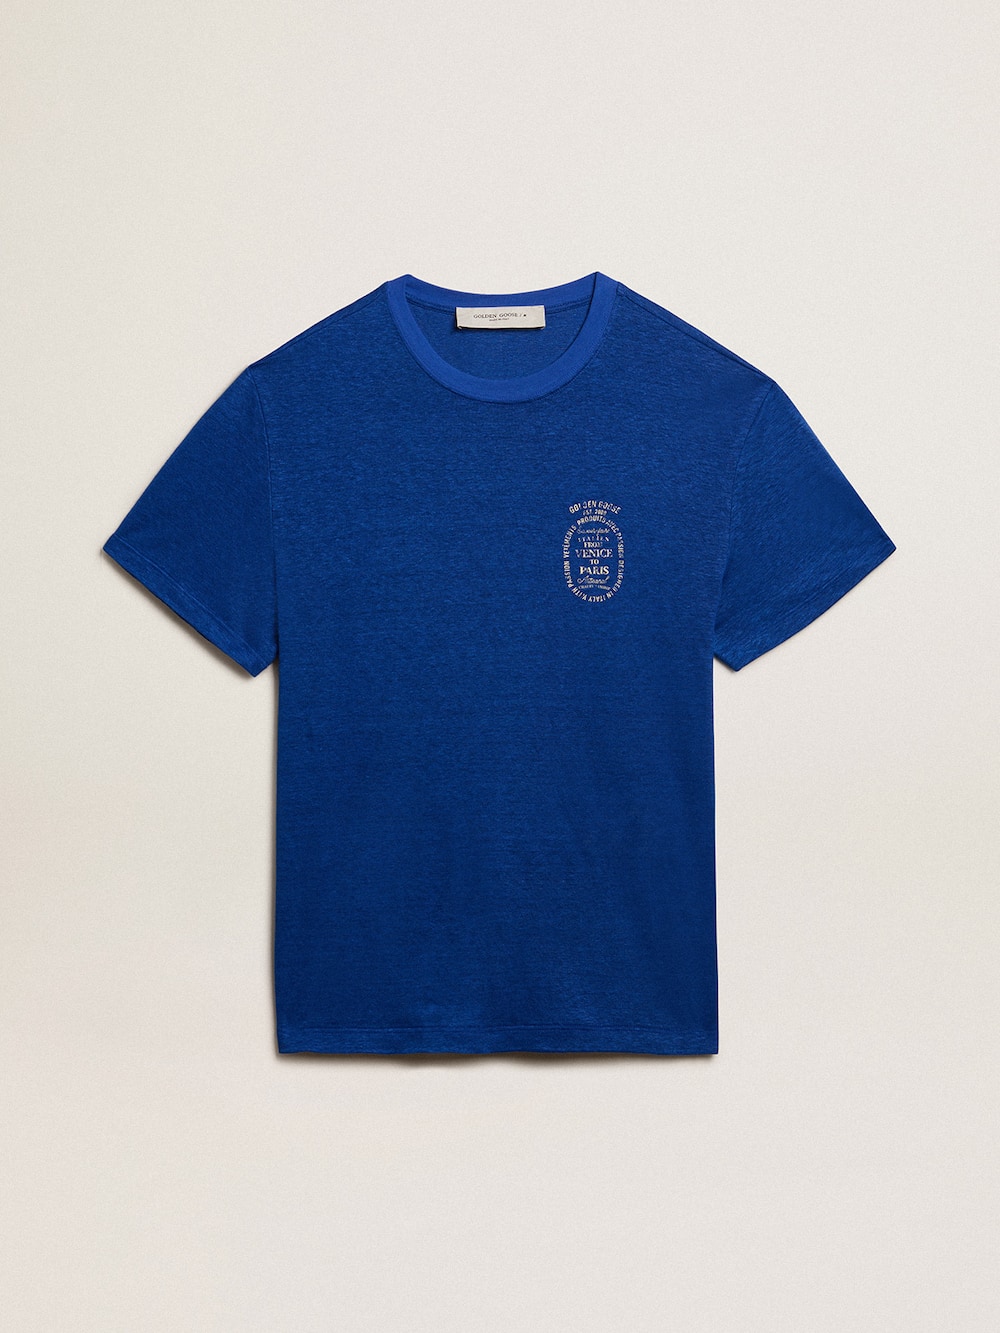 Golden Goose - Men’s blue-colored linen T-shirt with print on the chest in 